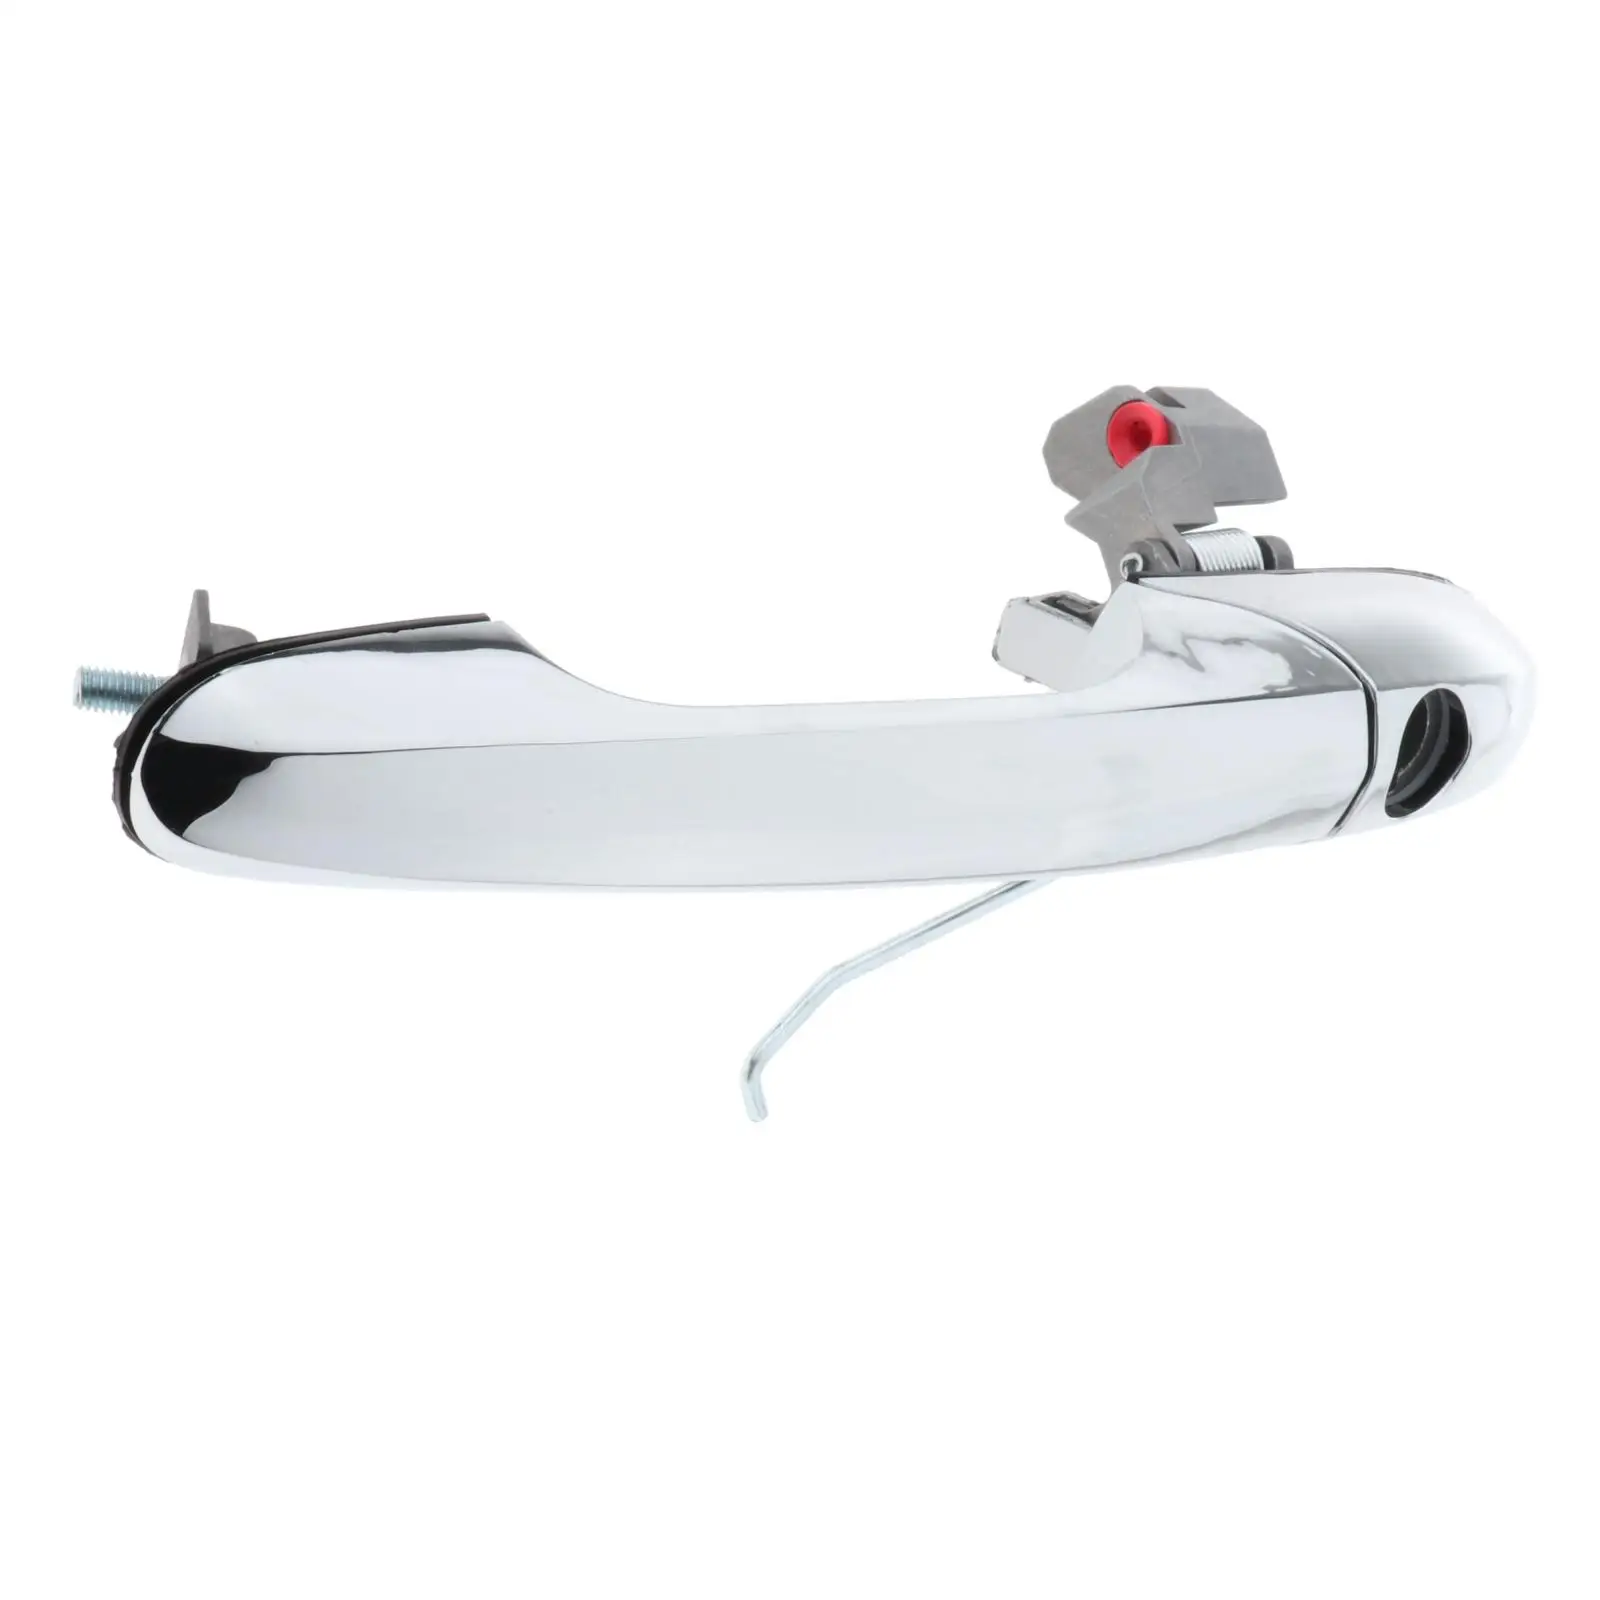 New Genuine Chrome Exterior Outside Outer Door Handle 735592012 fit for Fiat 500, Easy installation, Direct replacement